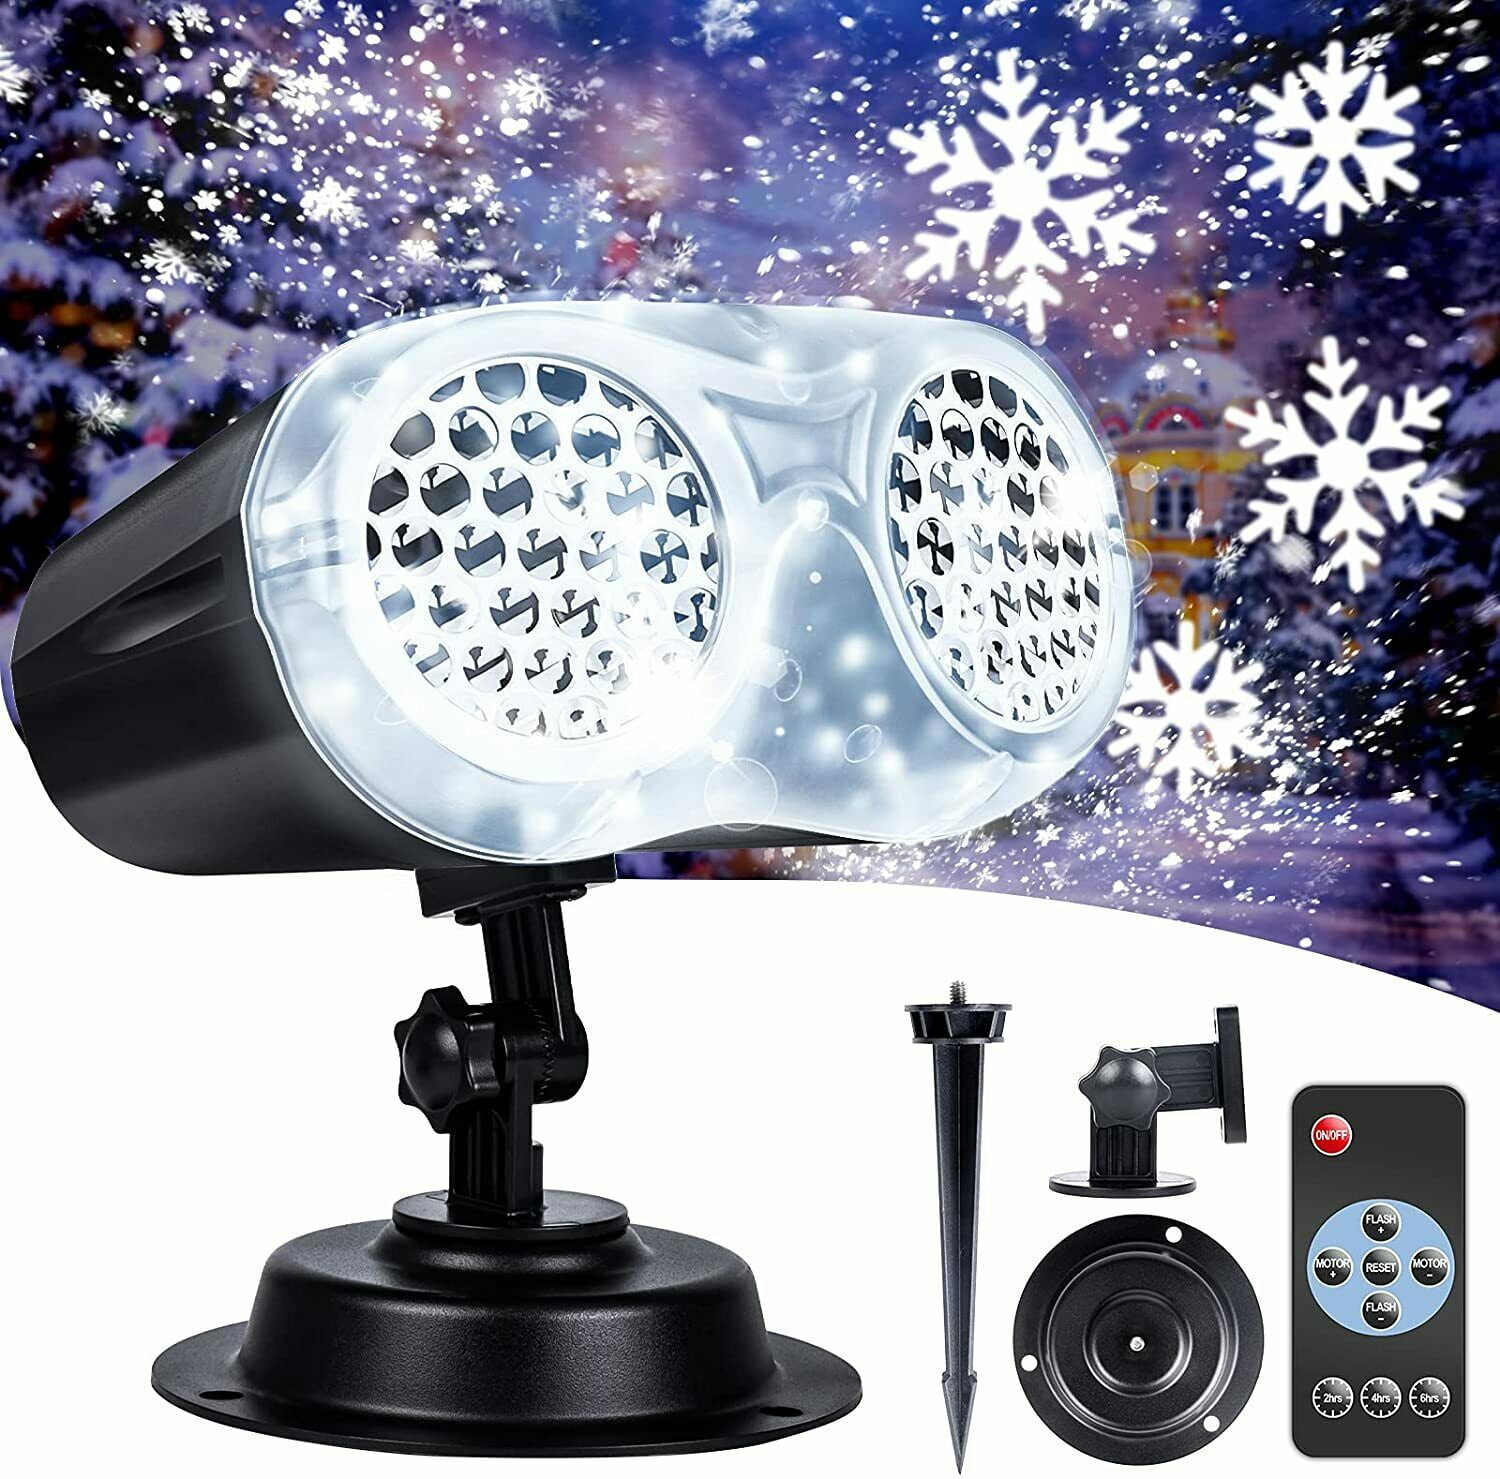 Dropship Outdoor Waterproof Christmas Snowflake LED Projector Lights With Remote  Control to Sell Online at a Lower Price